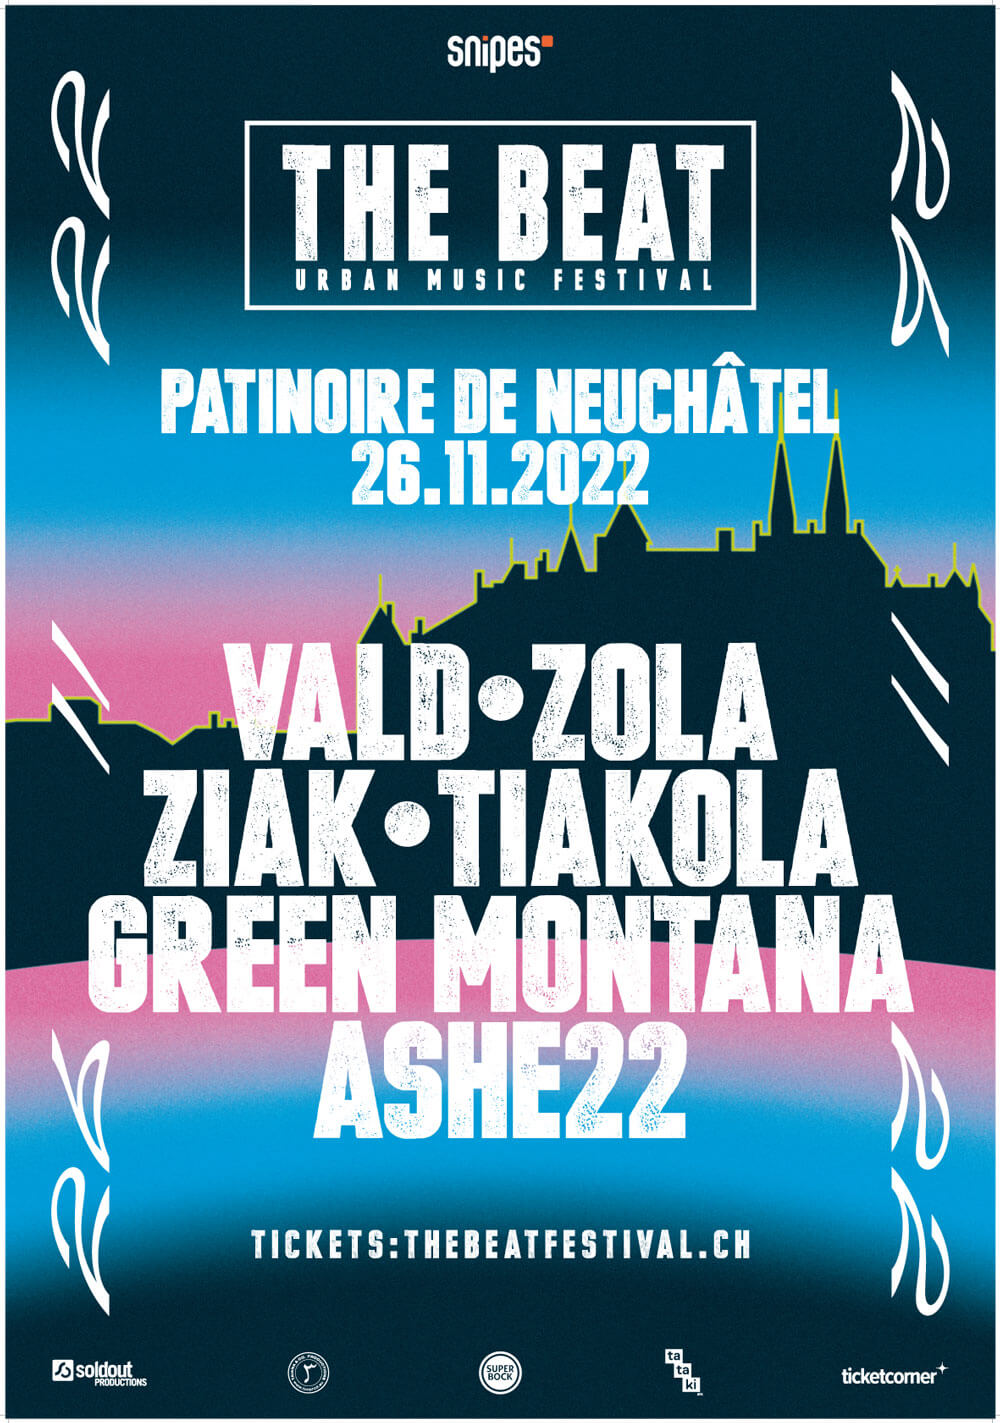 The beat festival - Edition 2022